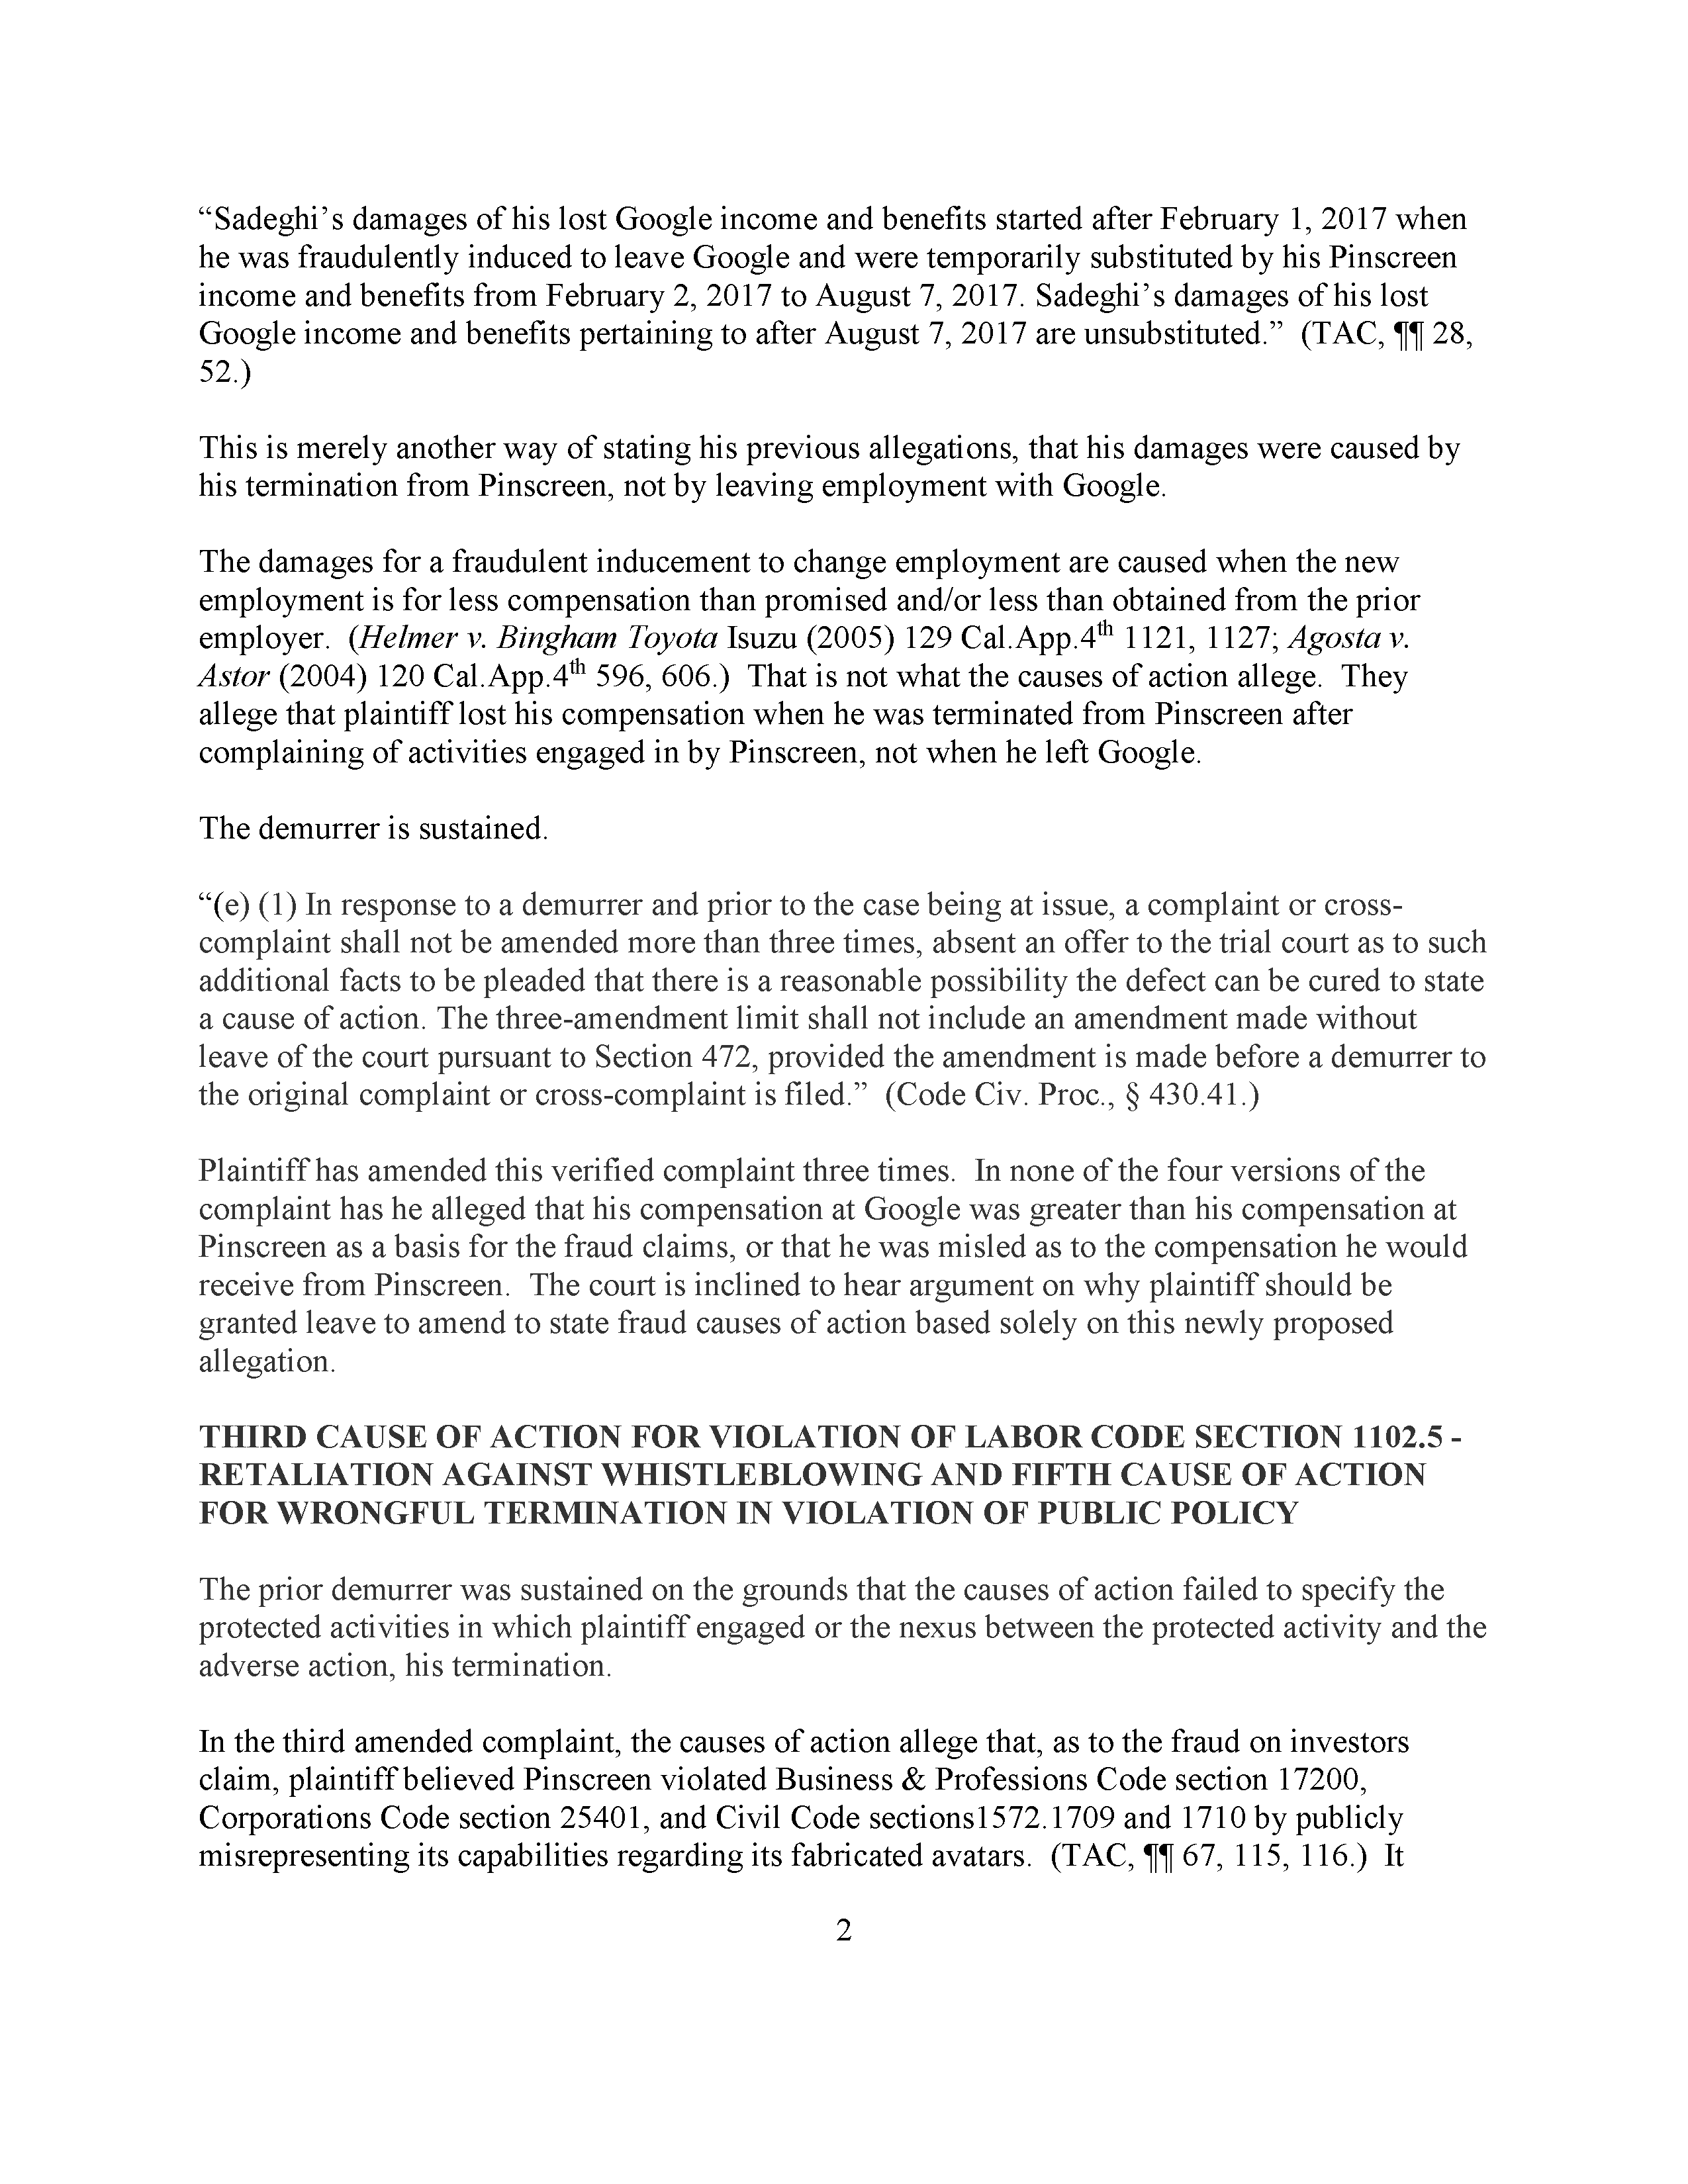 Court Ruling on Pinscreen's and Hao Li's Demurrer to the TAC - Full Page 2